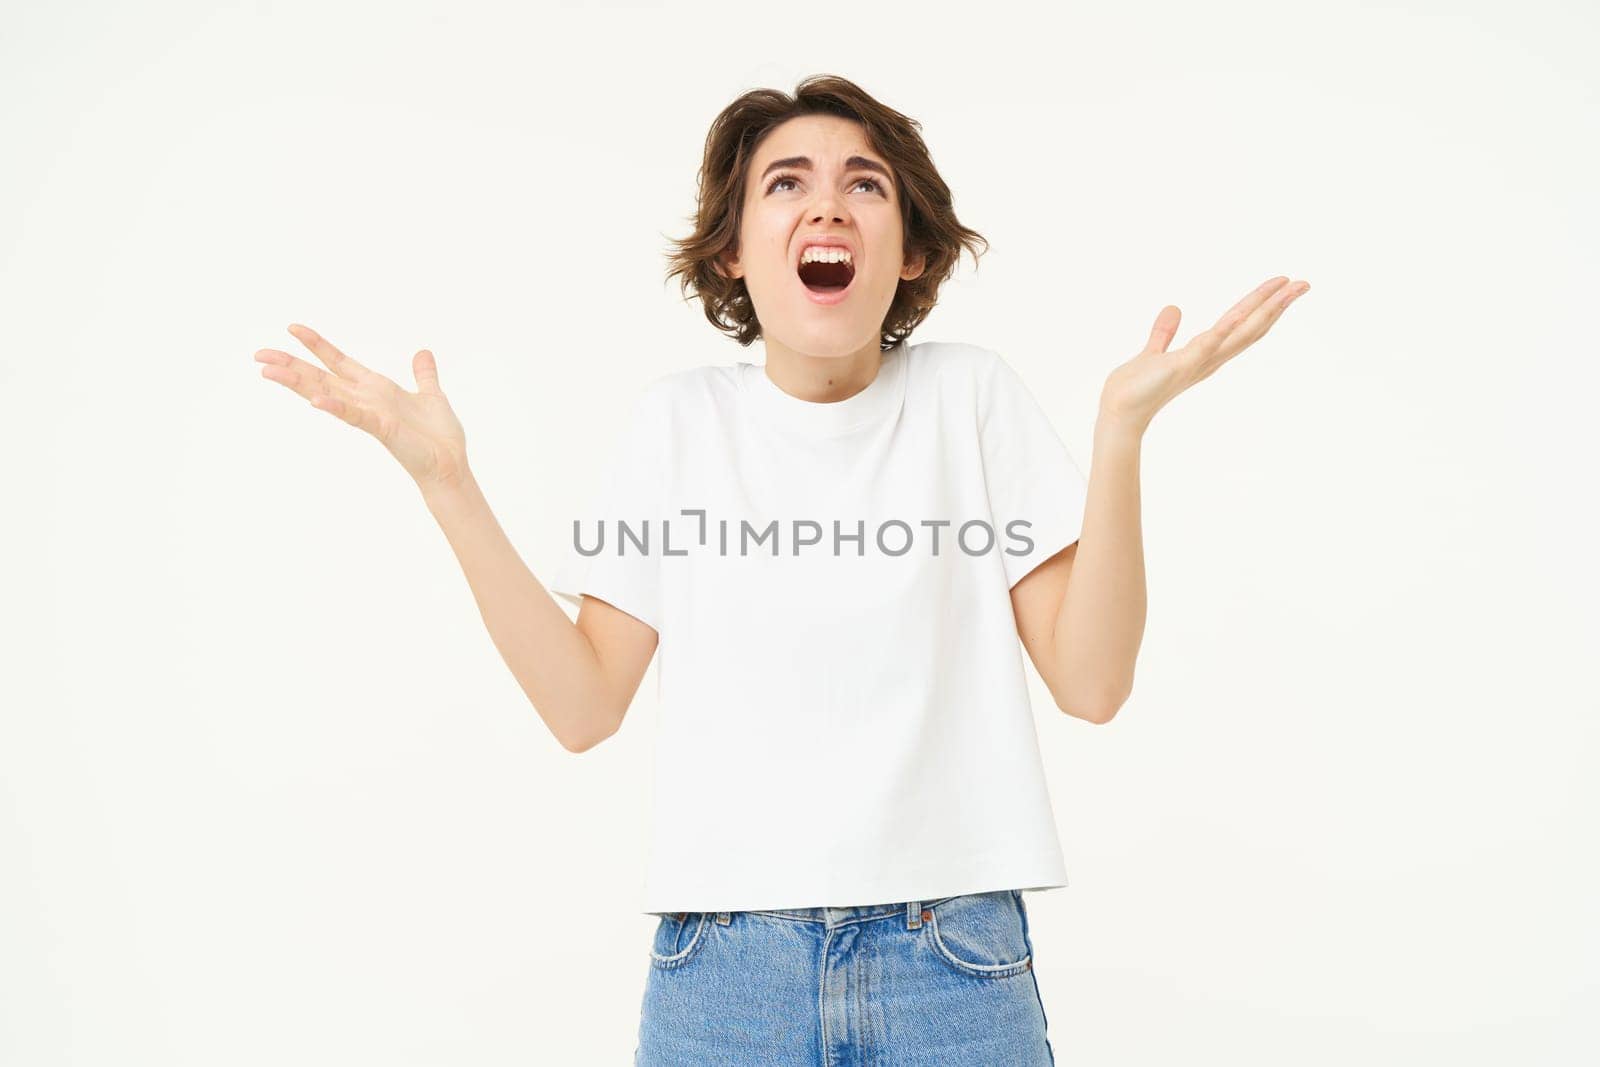 Frustrated young woman, looking upset and disappointed, complaining, screaming from distress and anger, standing over white studio background.